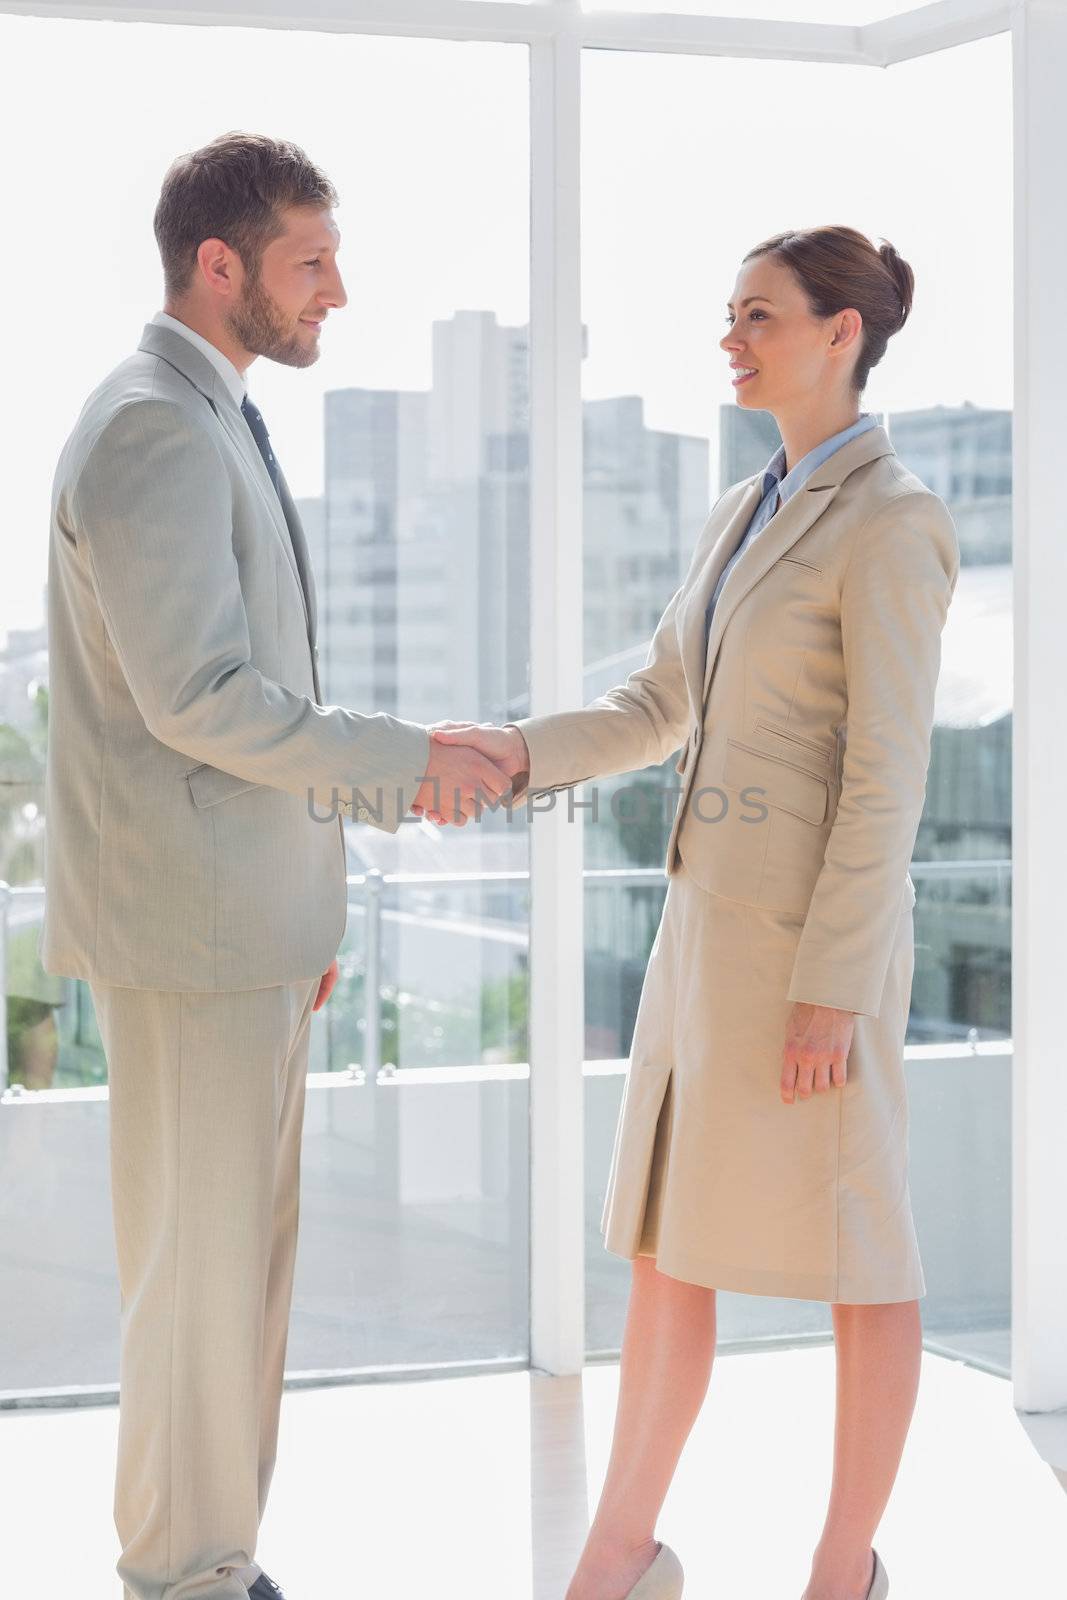 Business people shaking hands and smiling by Wavebreakmedia